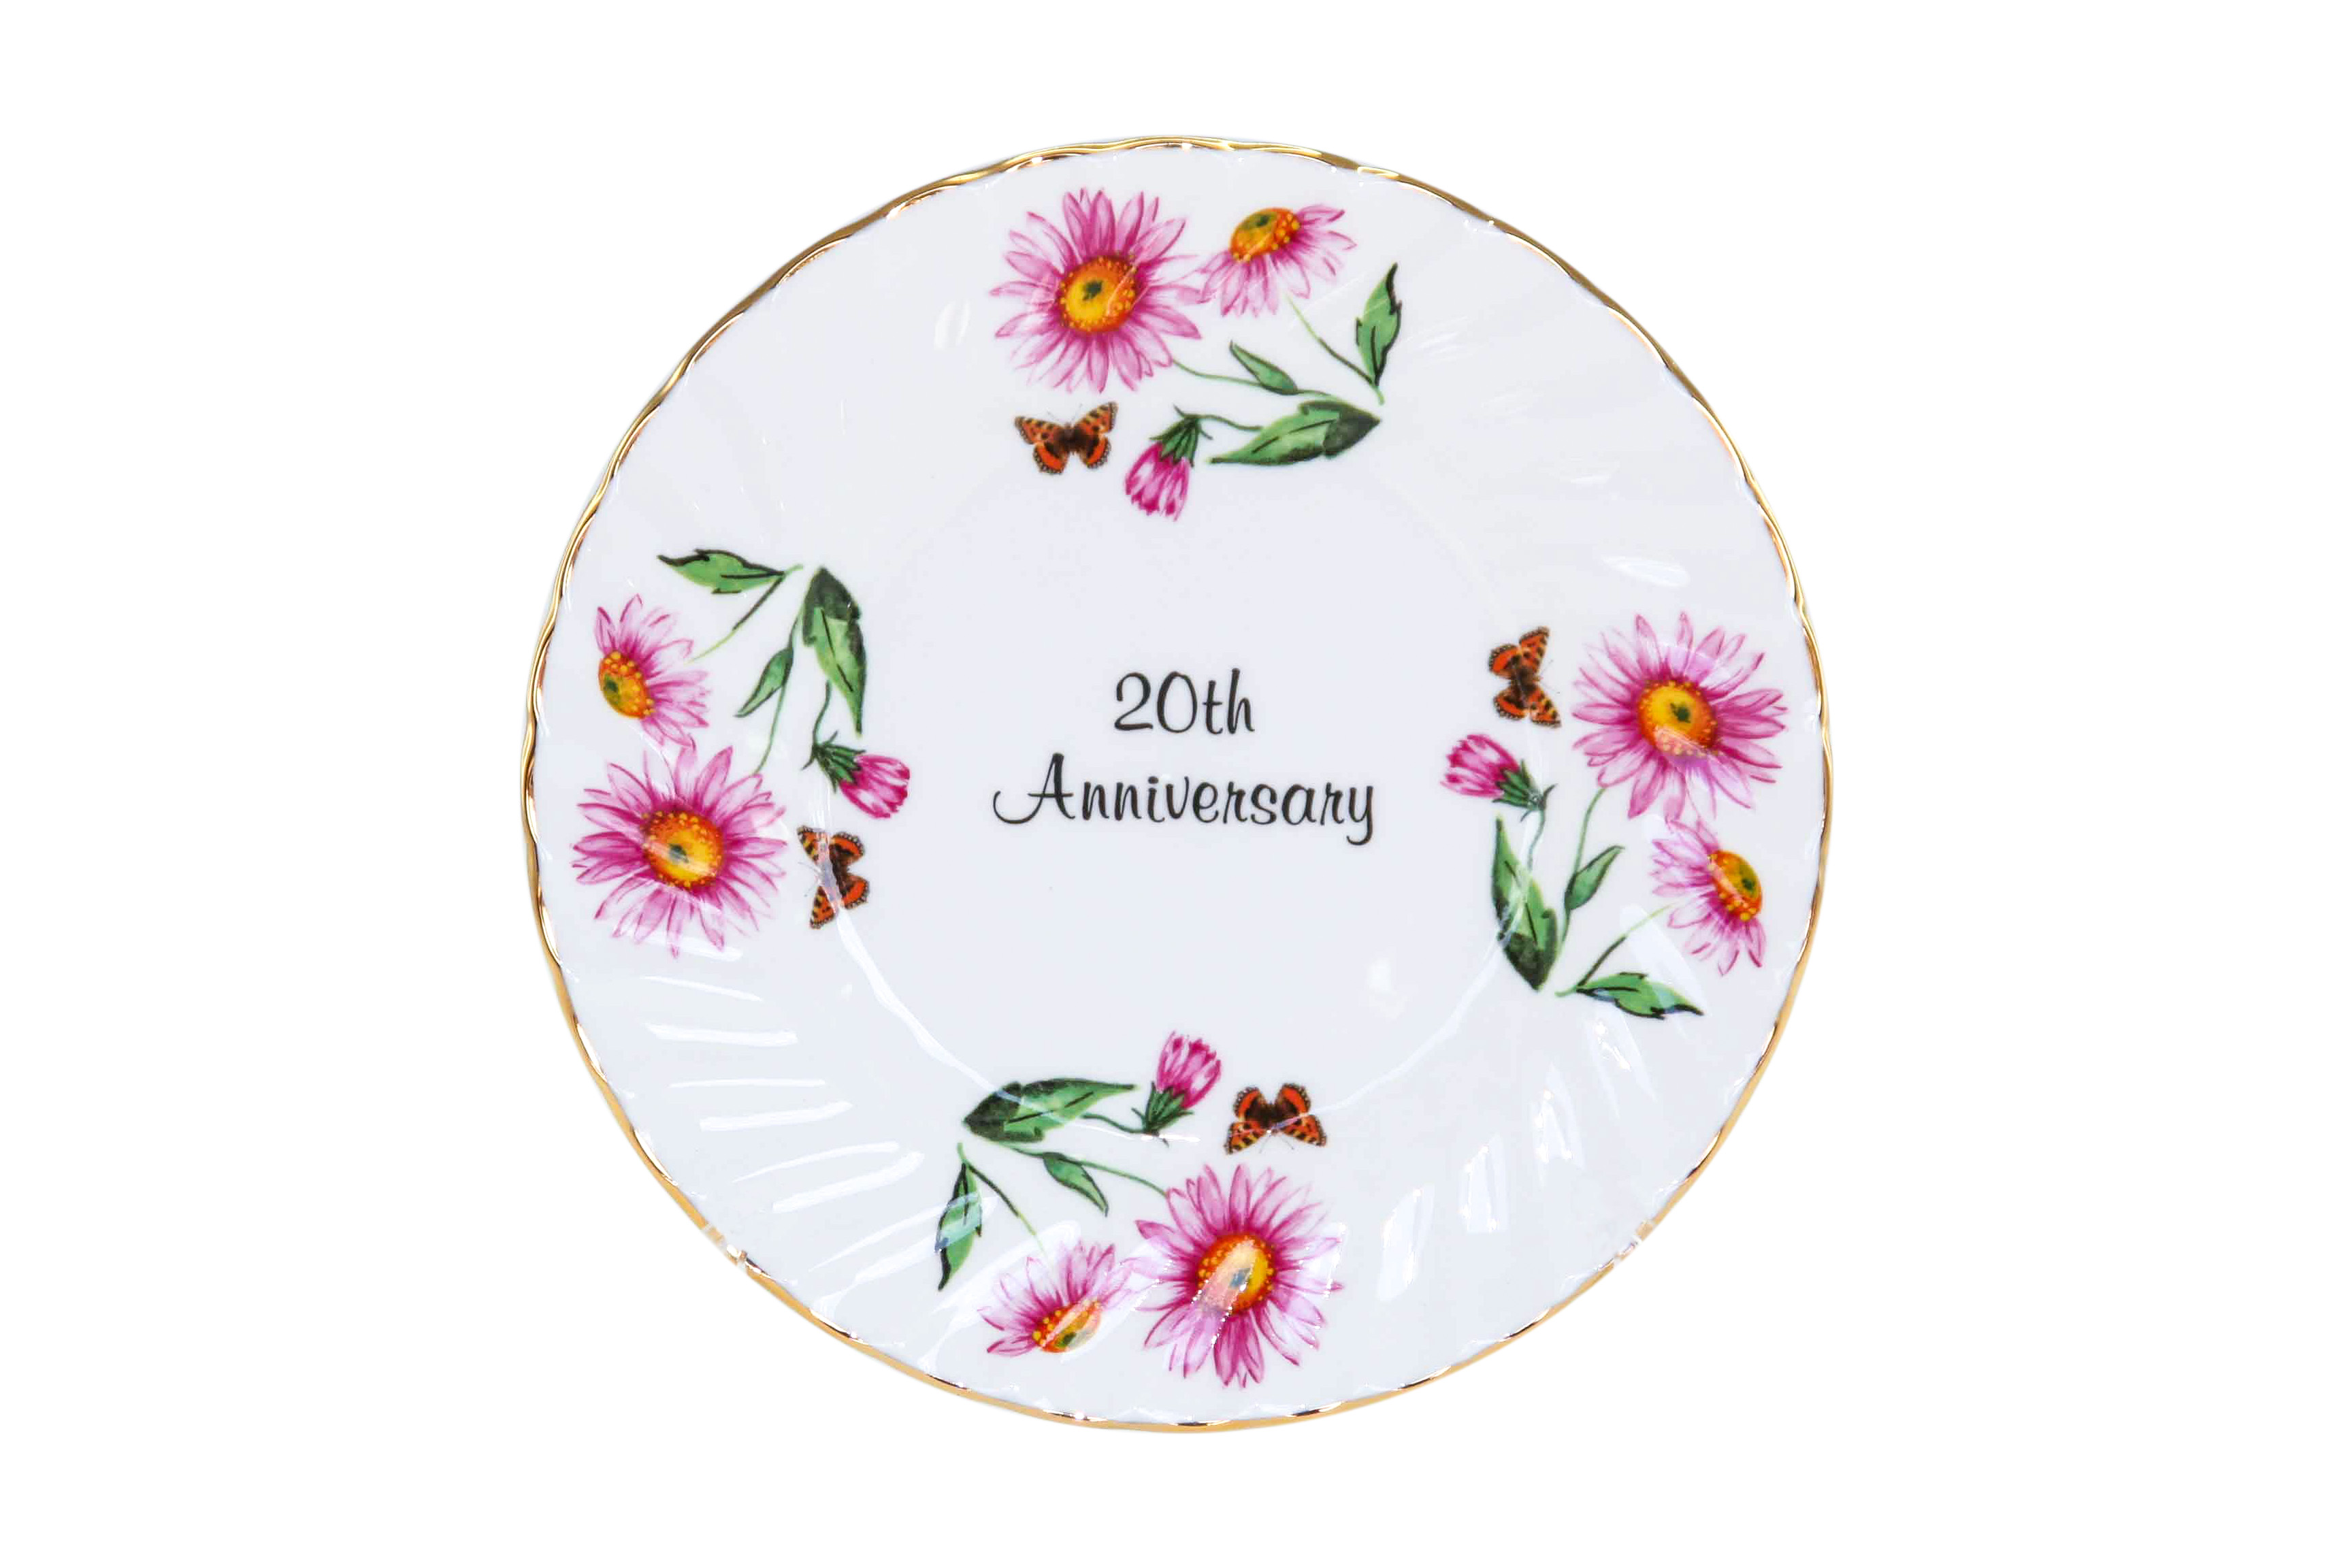 20th Anniversary Plate (6 inch) with stand - Click Image to Close